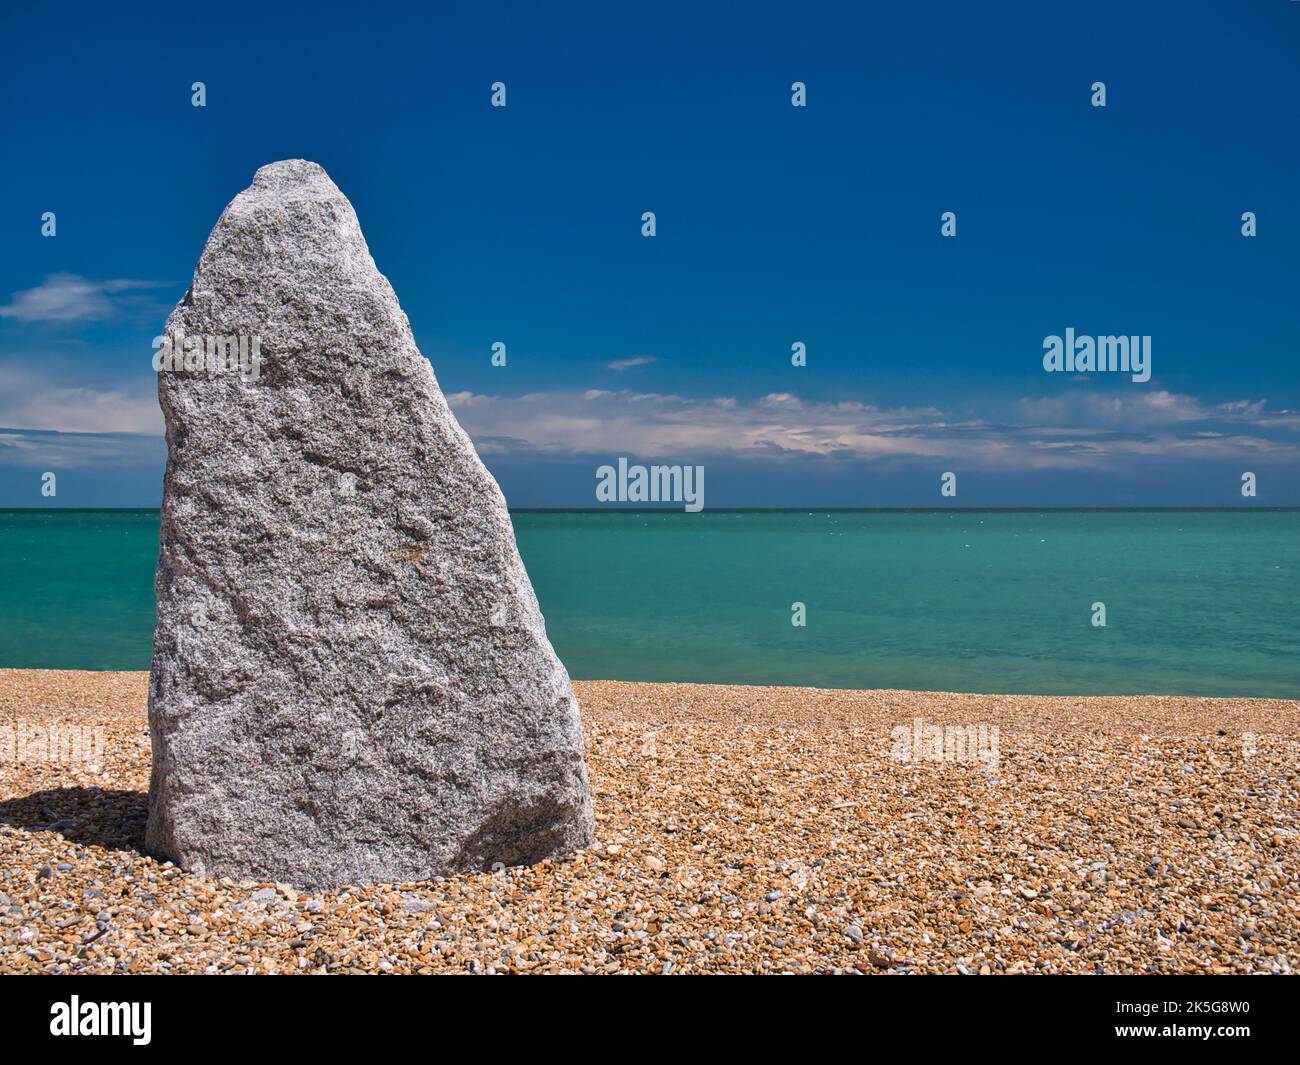 A tall, 2m, grey standing stone on the shingle beach at Walmer, Deal, Kent, UK. Taken on a sunny day with blue sky and a turquoise sea. Stock Photo